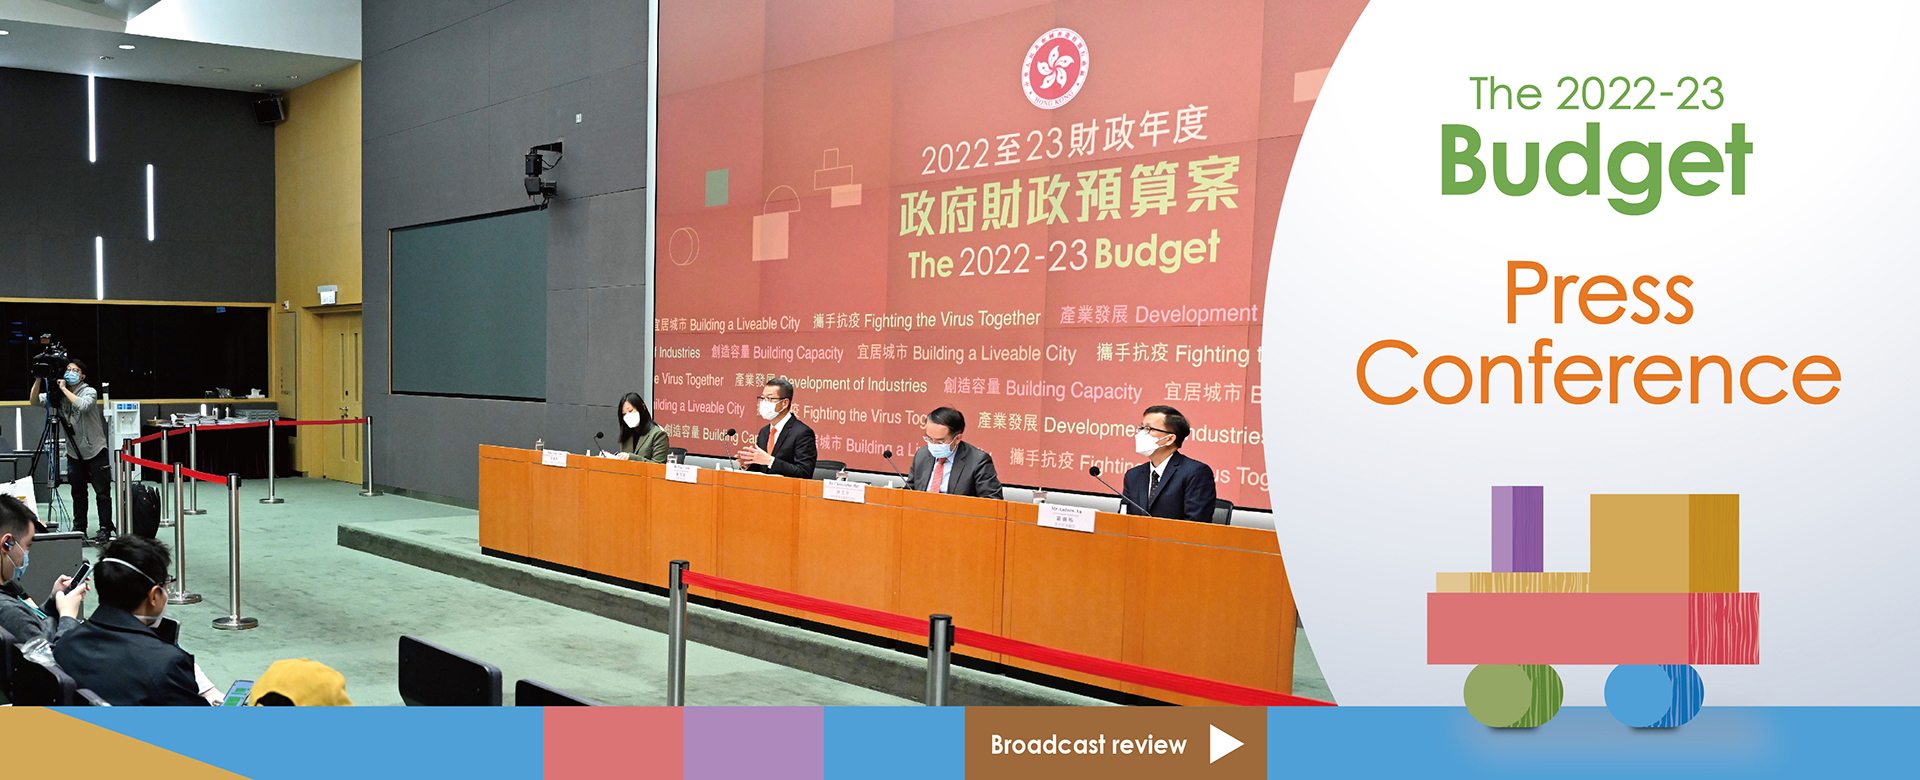 2022-23 Budget Press Conference Broadcast review